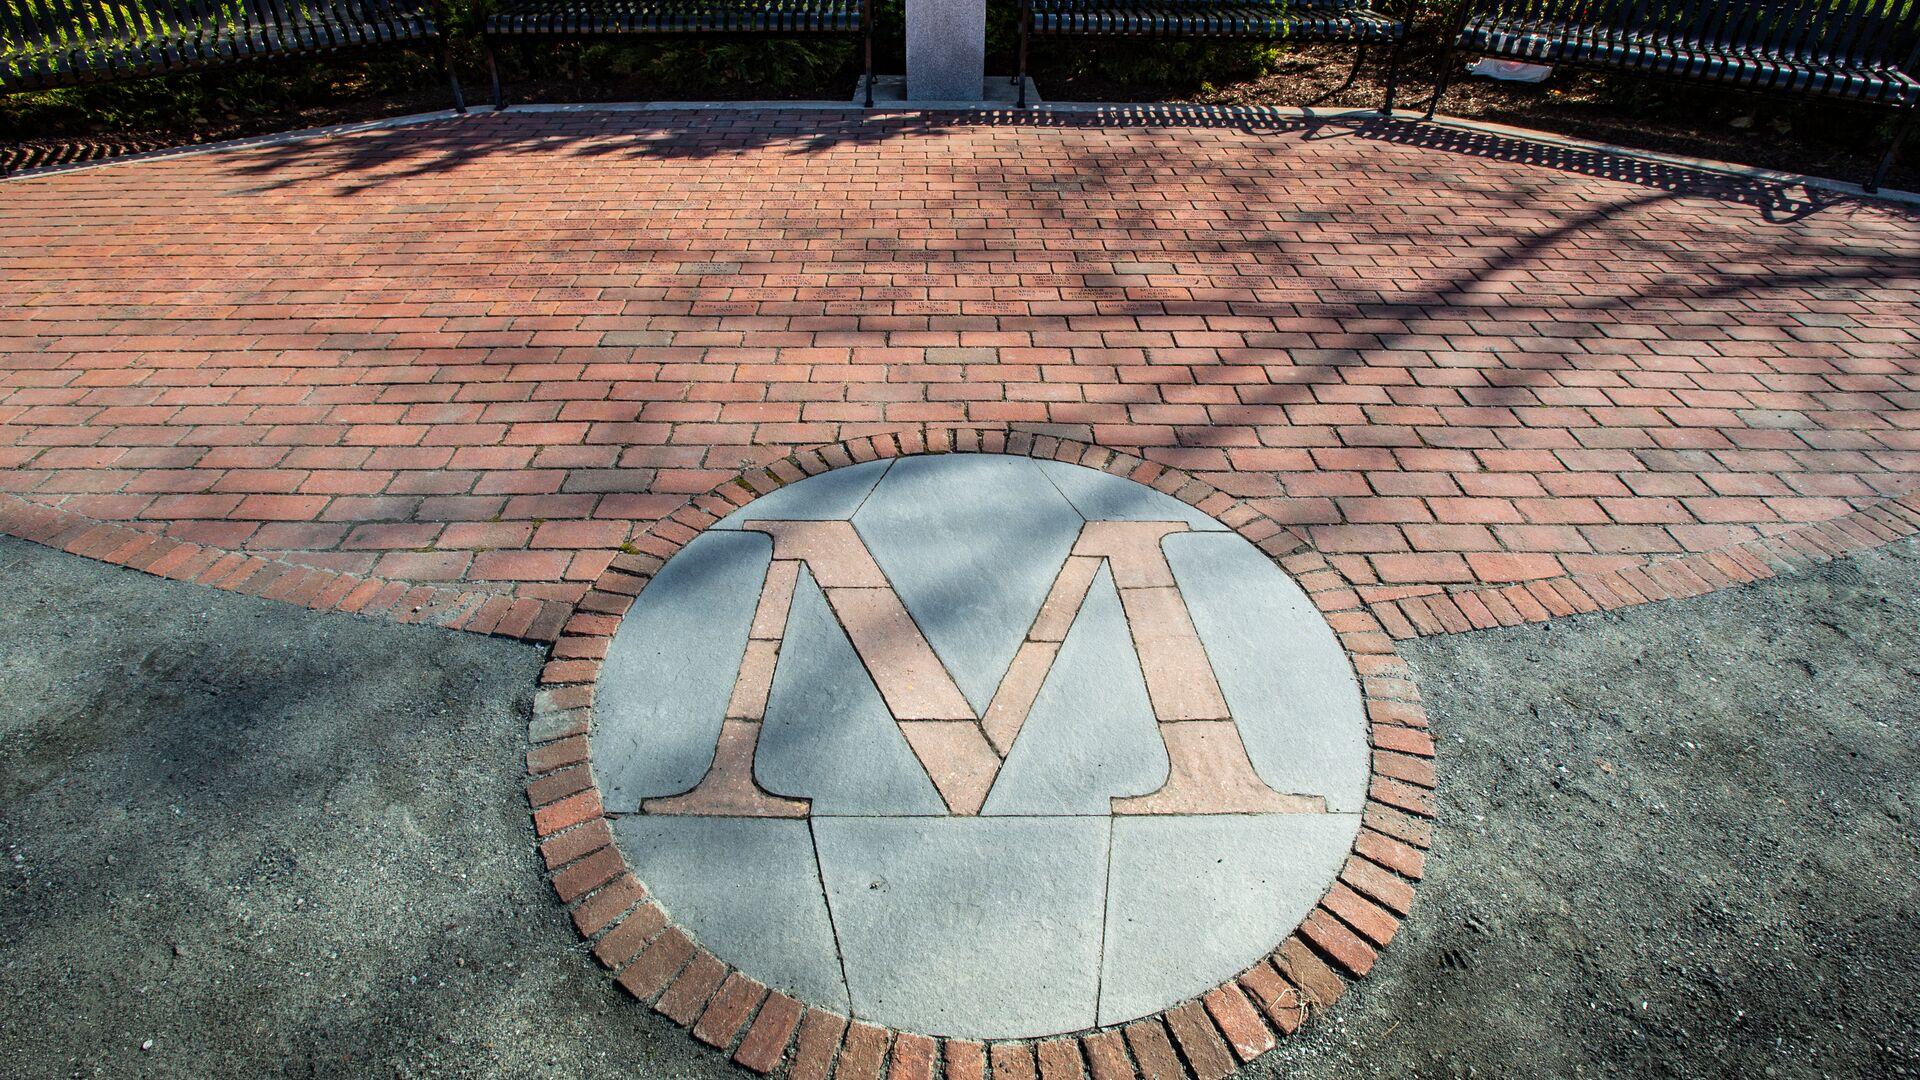 Fraternity Row Garden brick walkway with the University M inlaid in brick